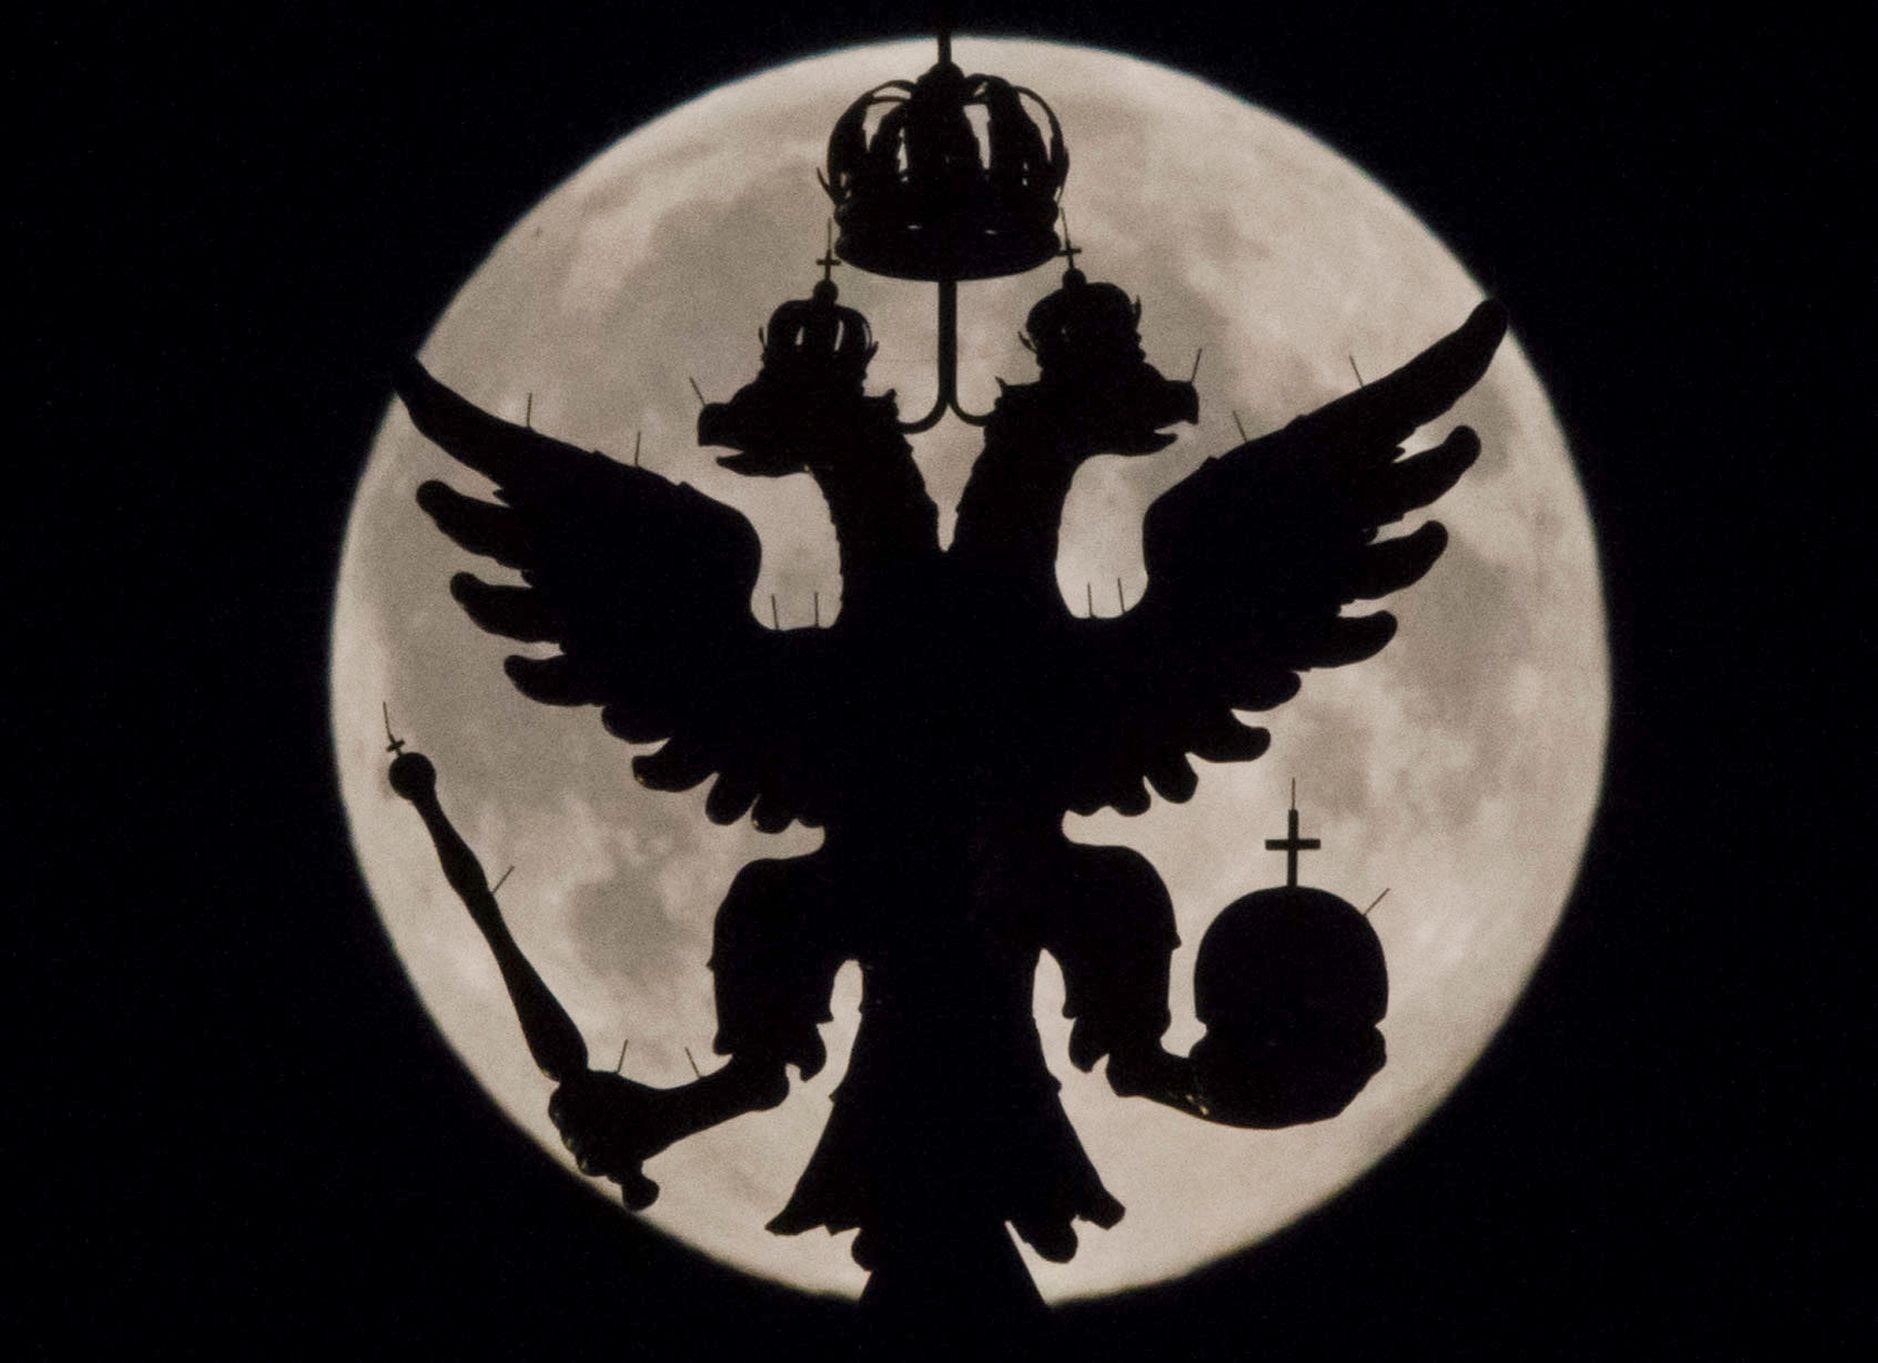 A two-headed eagle, the national symbol of Russia, is seen in front of the supermoon as it rises over the towers of Historical Museum in Moscow